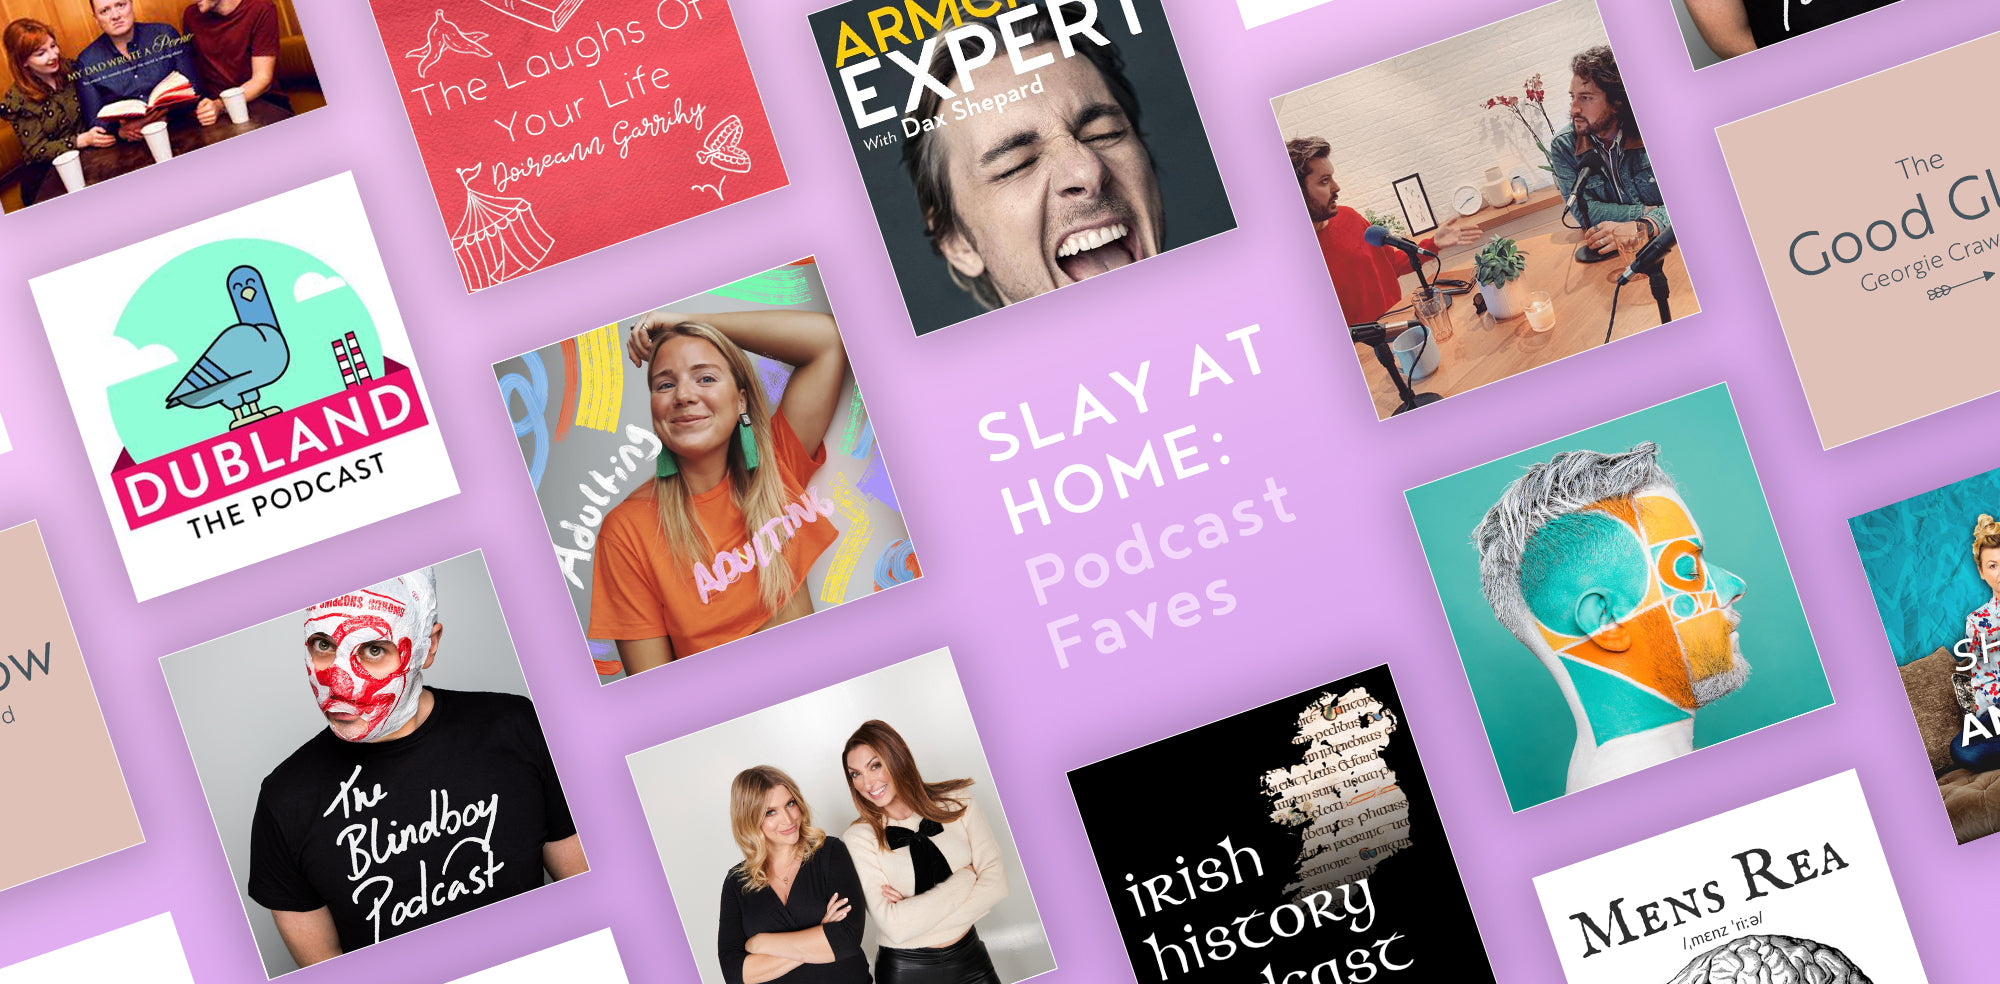 Slay at home with MSC: Podcast Faves